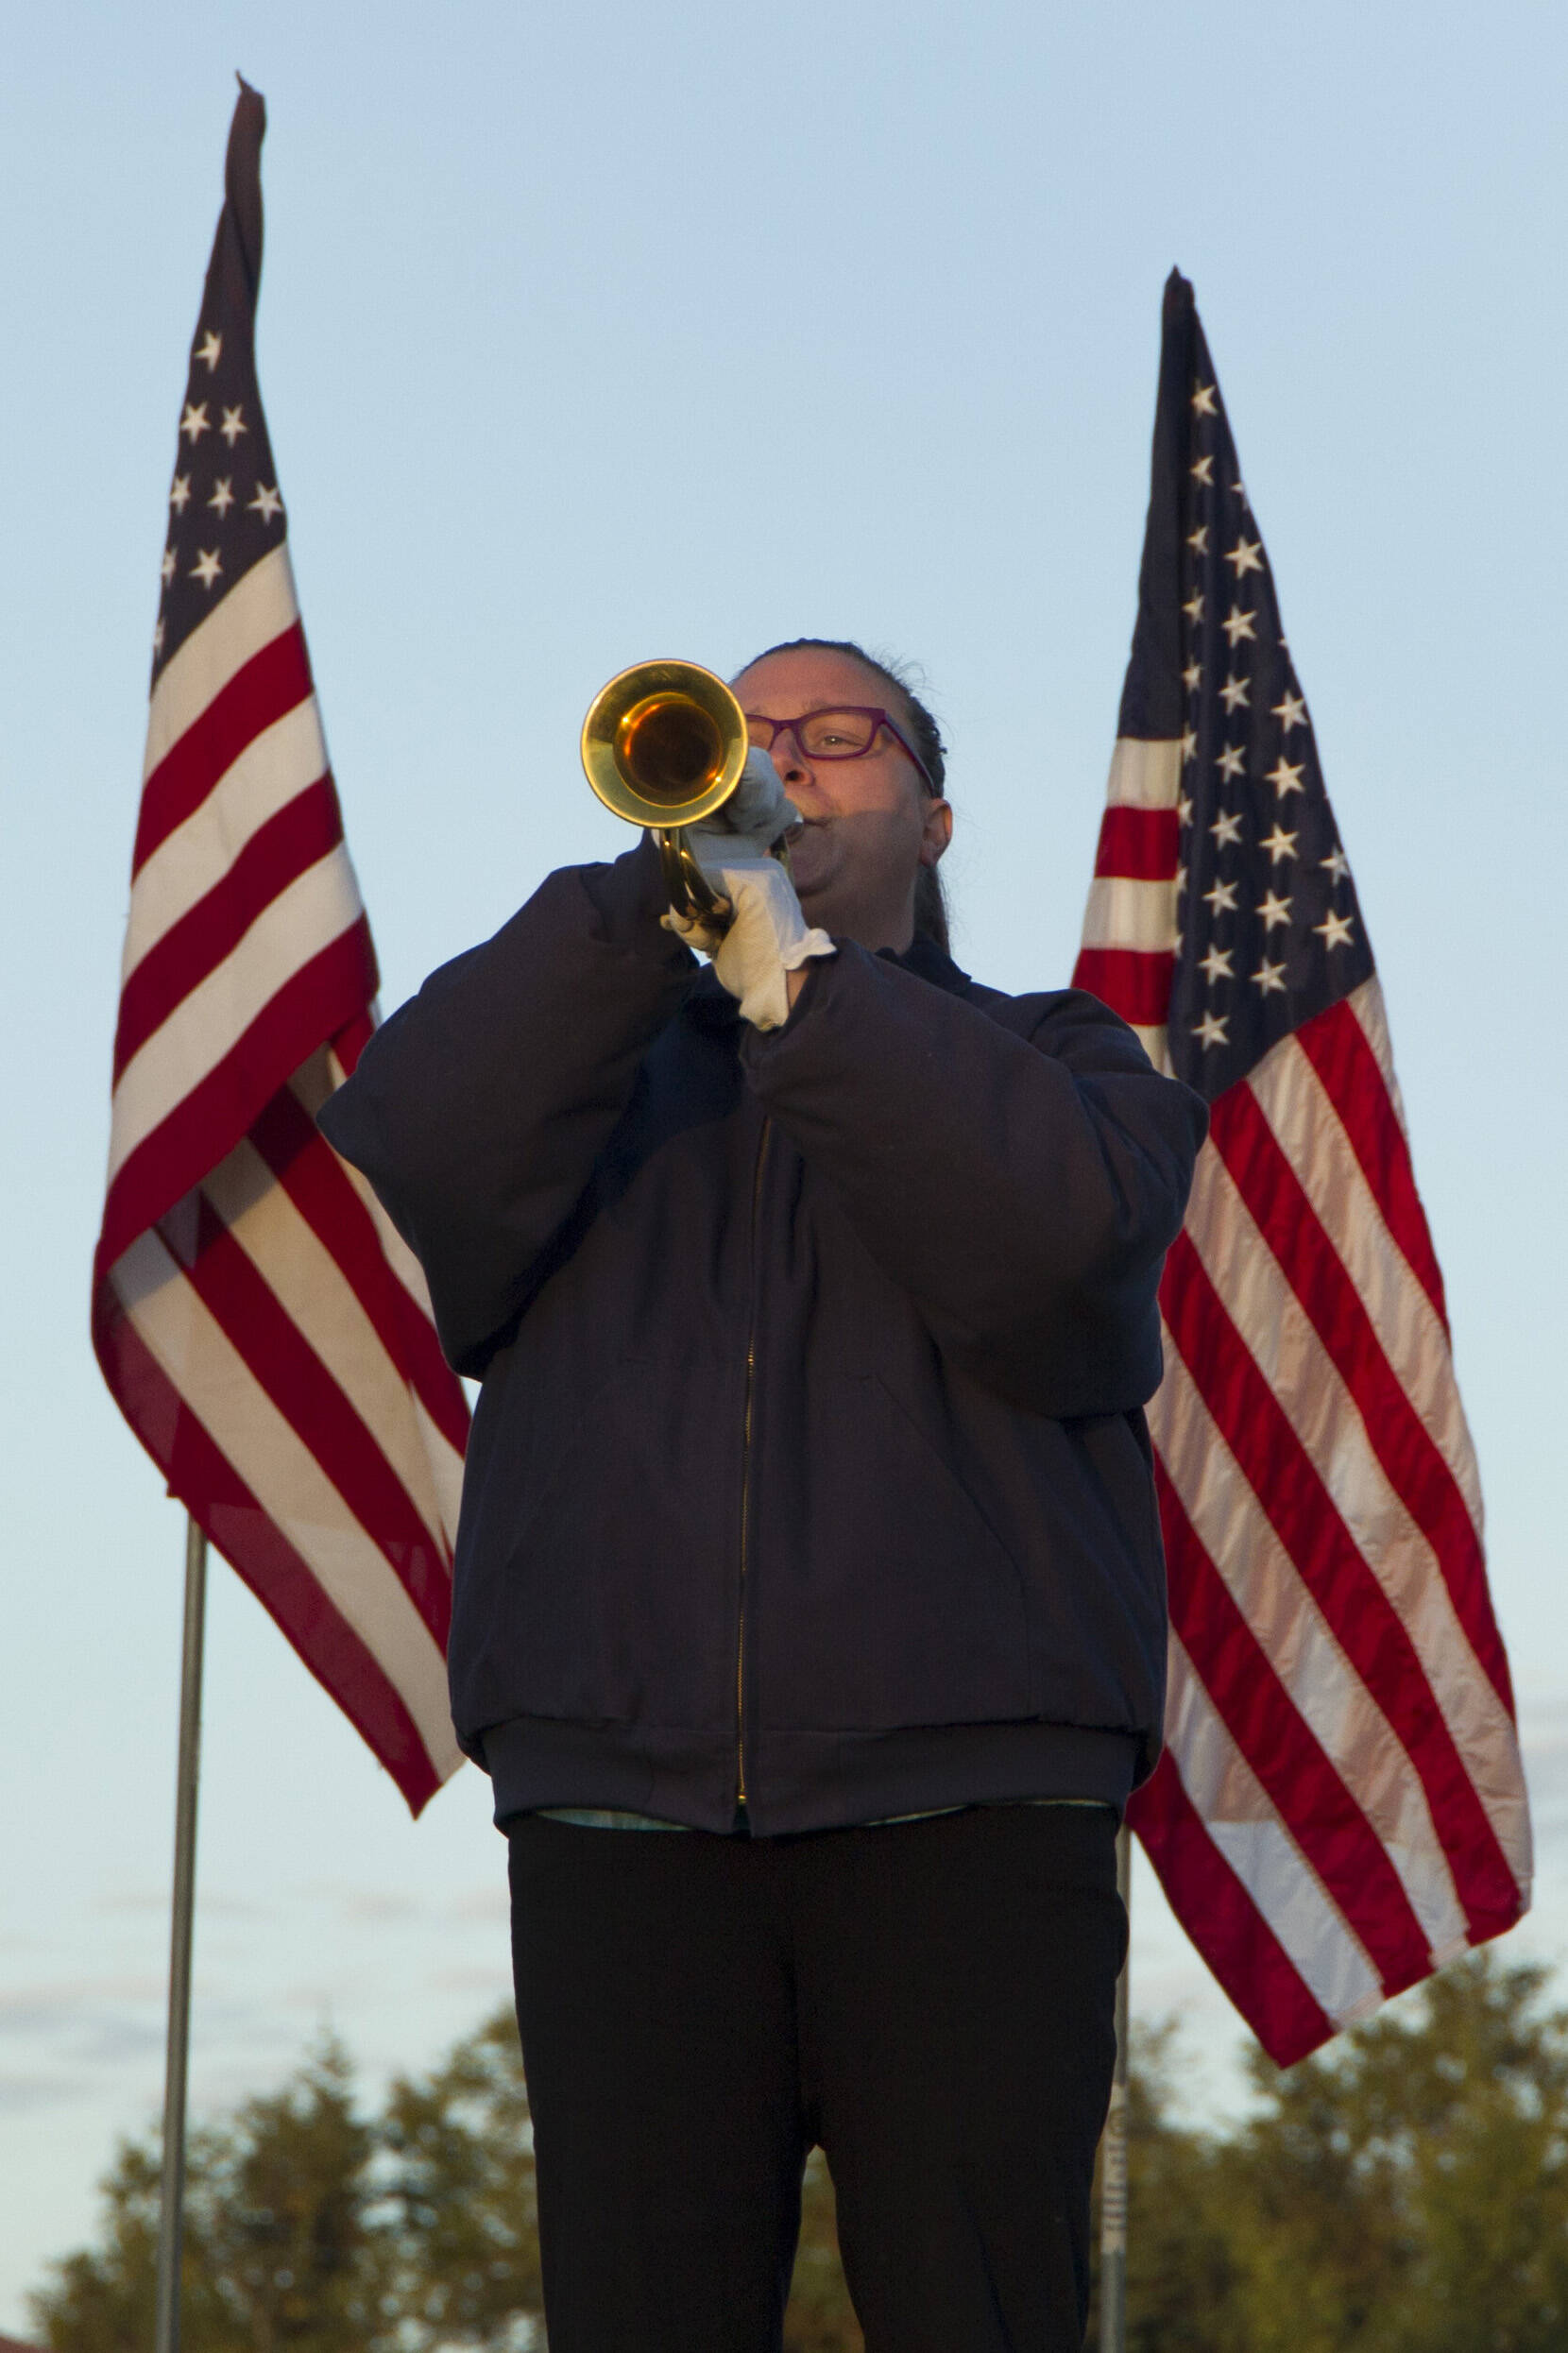 Christie Hill plays “Taps” during the 9/11 memorial service on Saturday. (Photo by Sarah Knapp/Homer News)